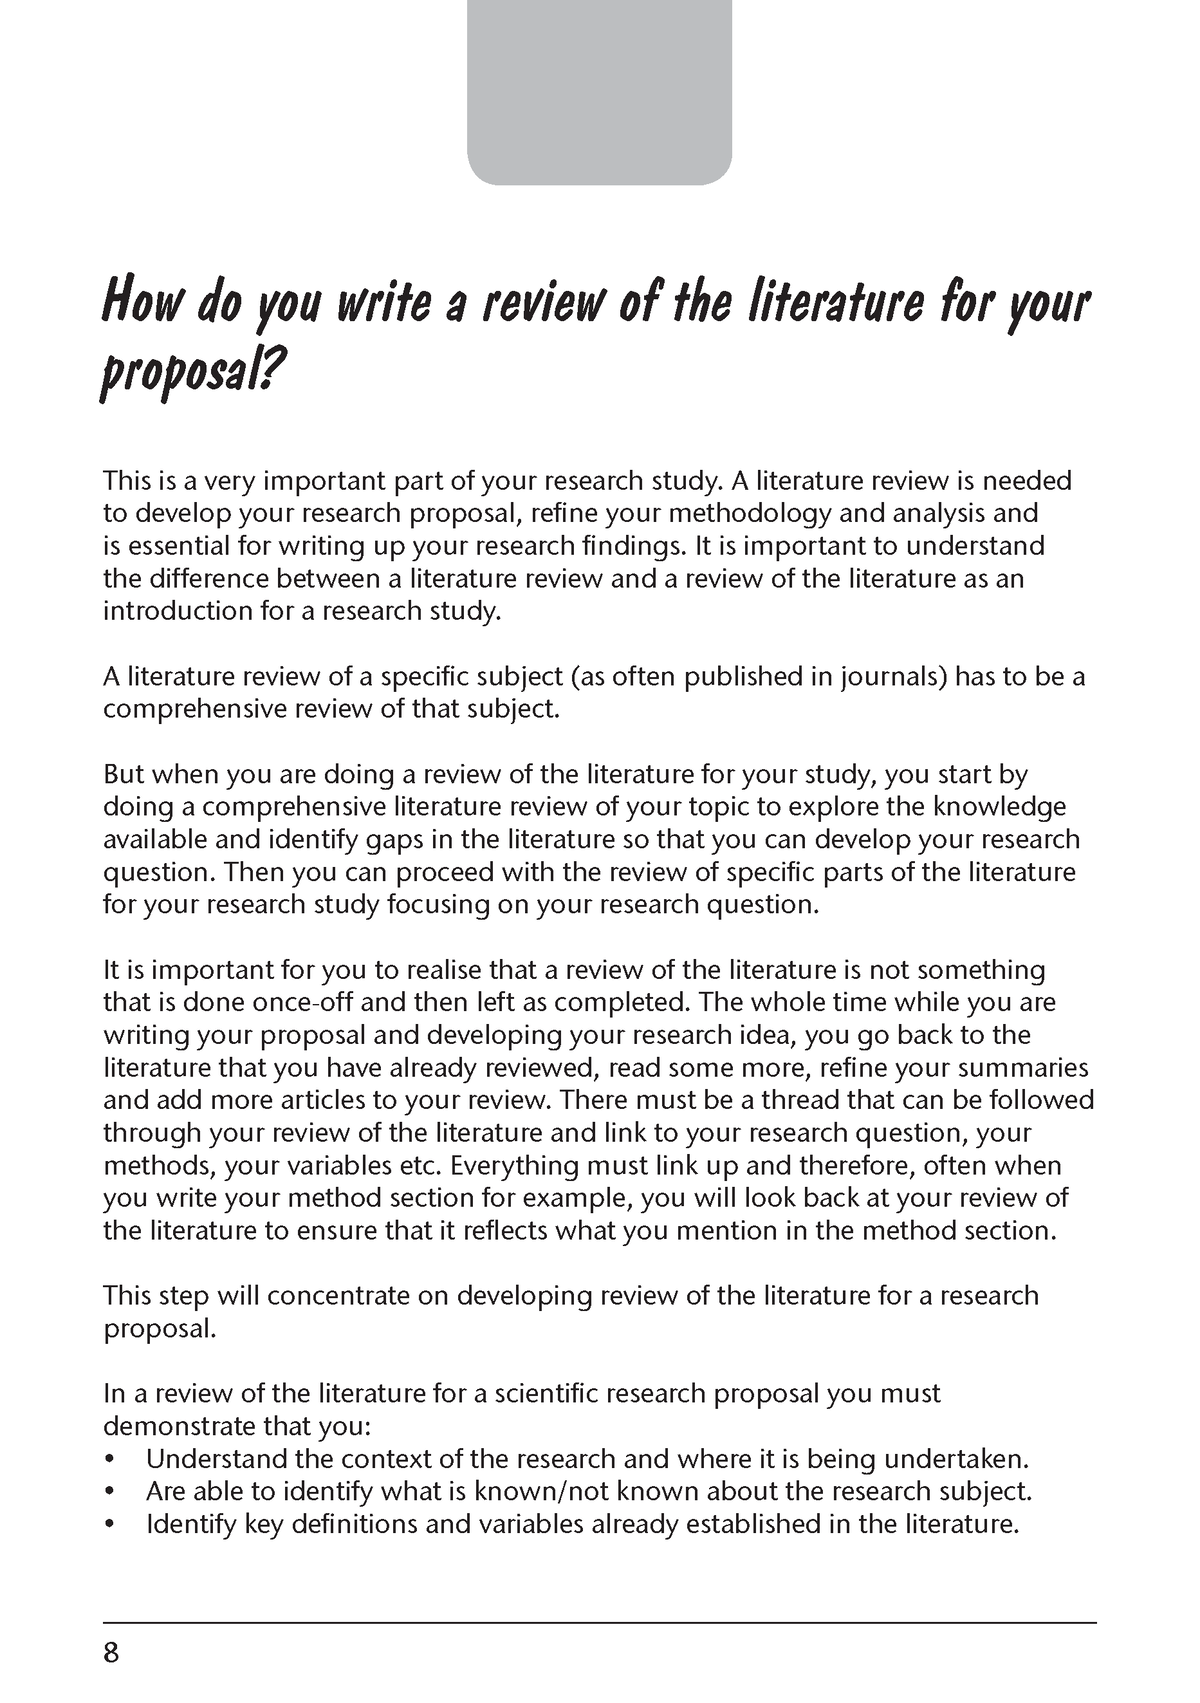 how to write literature review in proposal